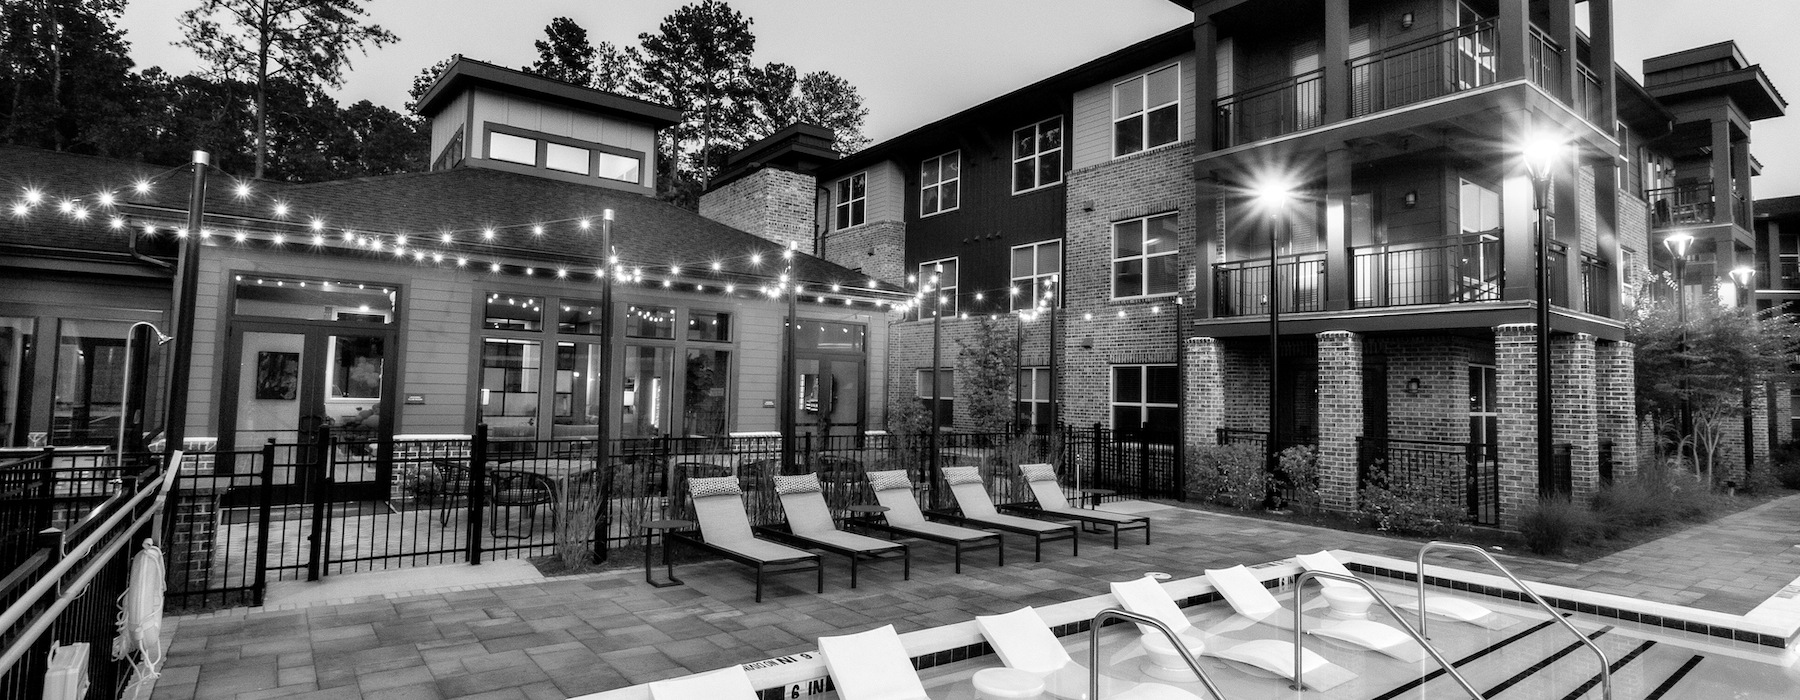 pool and lounge area in black and white